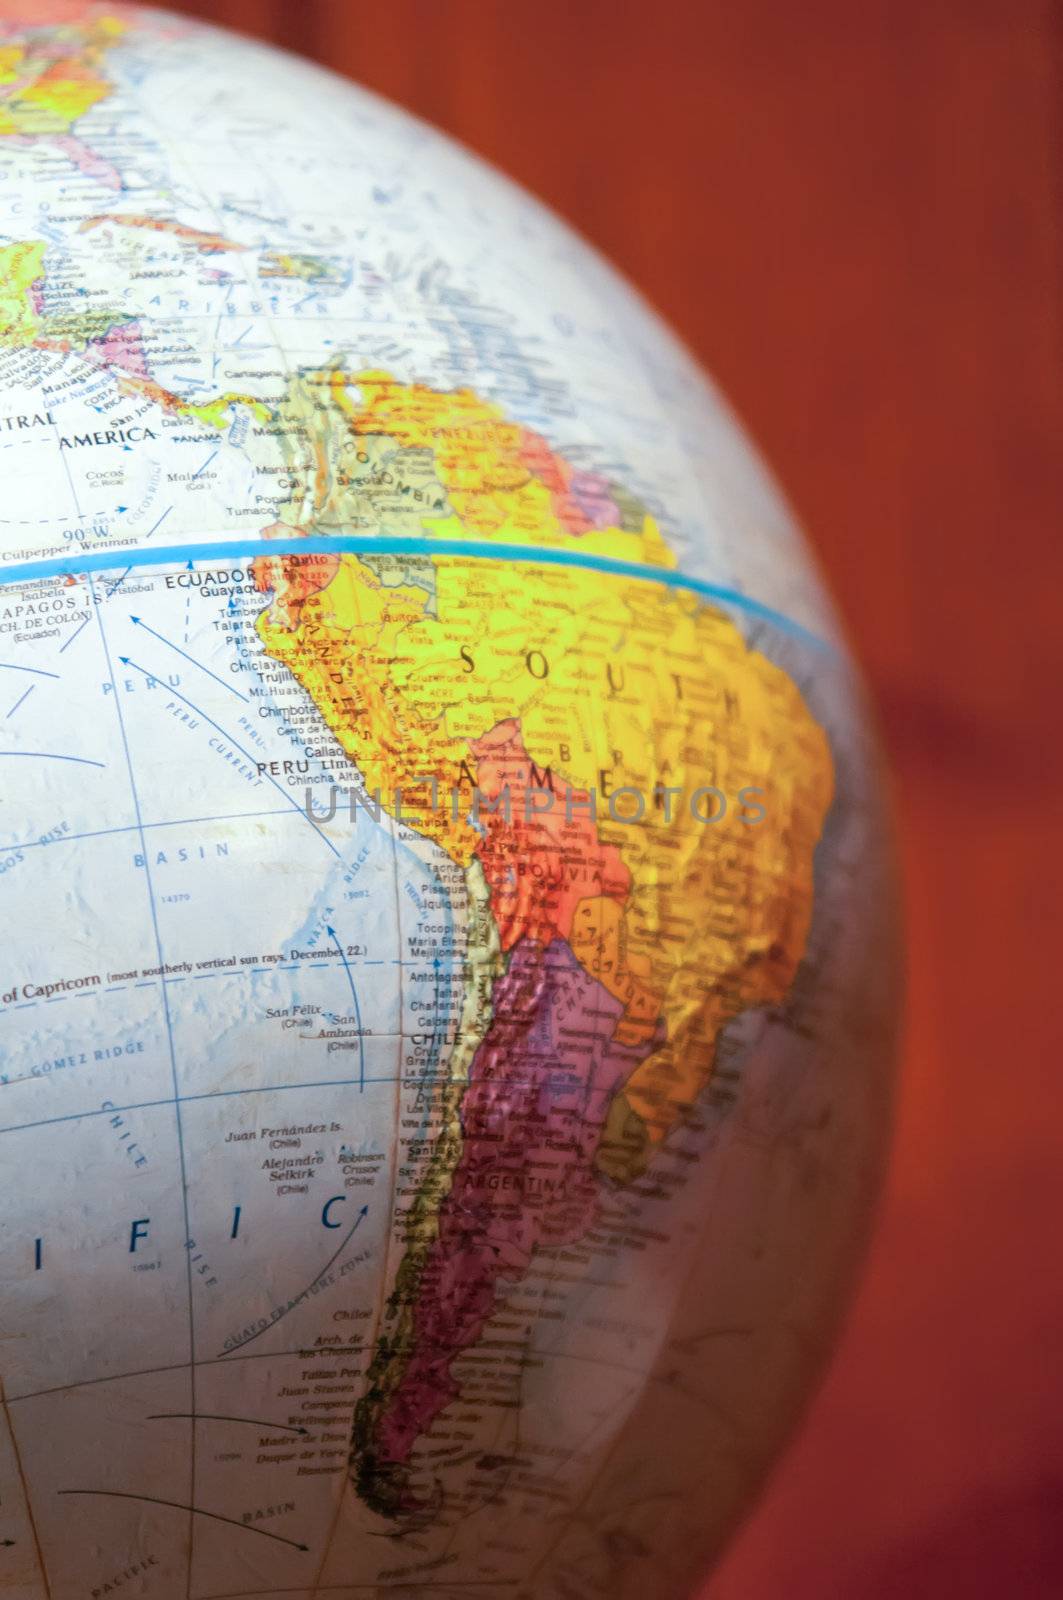 Part of a globe with map of South America by digidreamgrafix